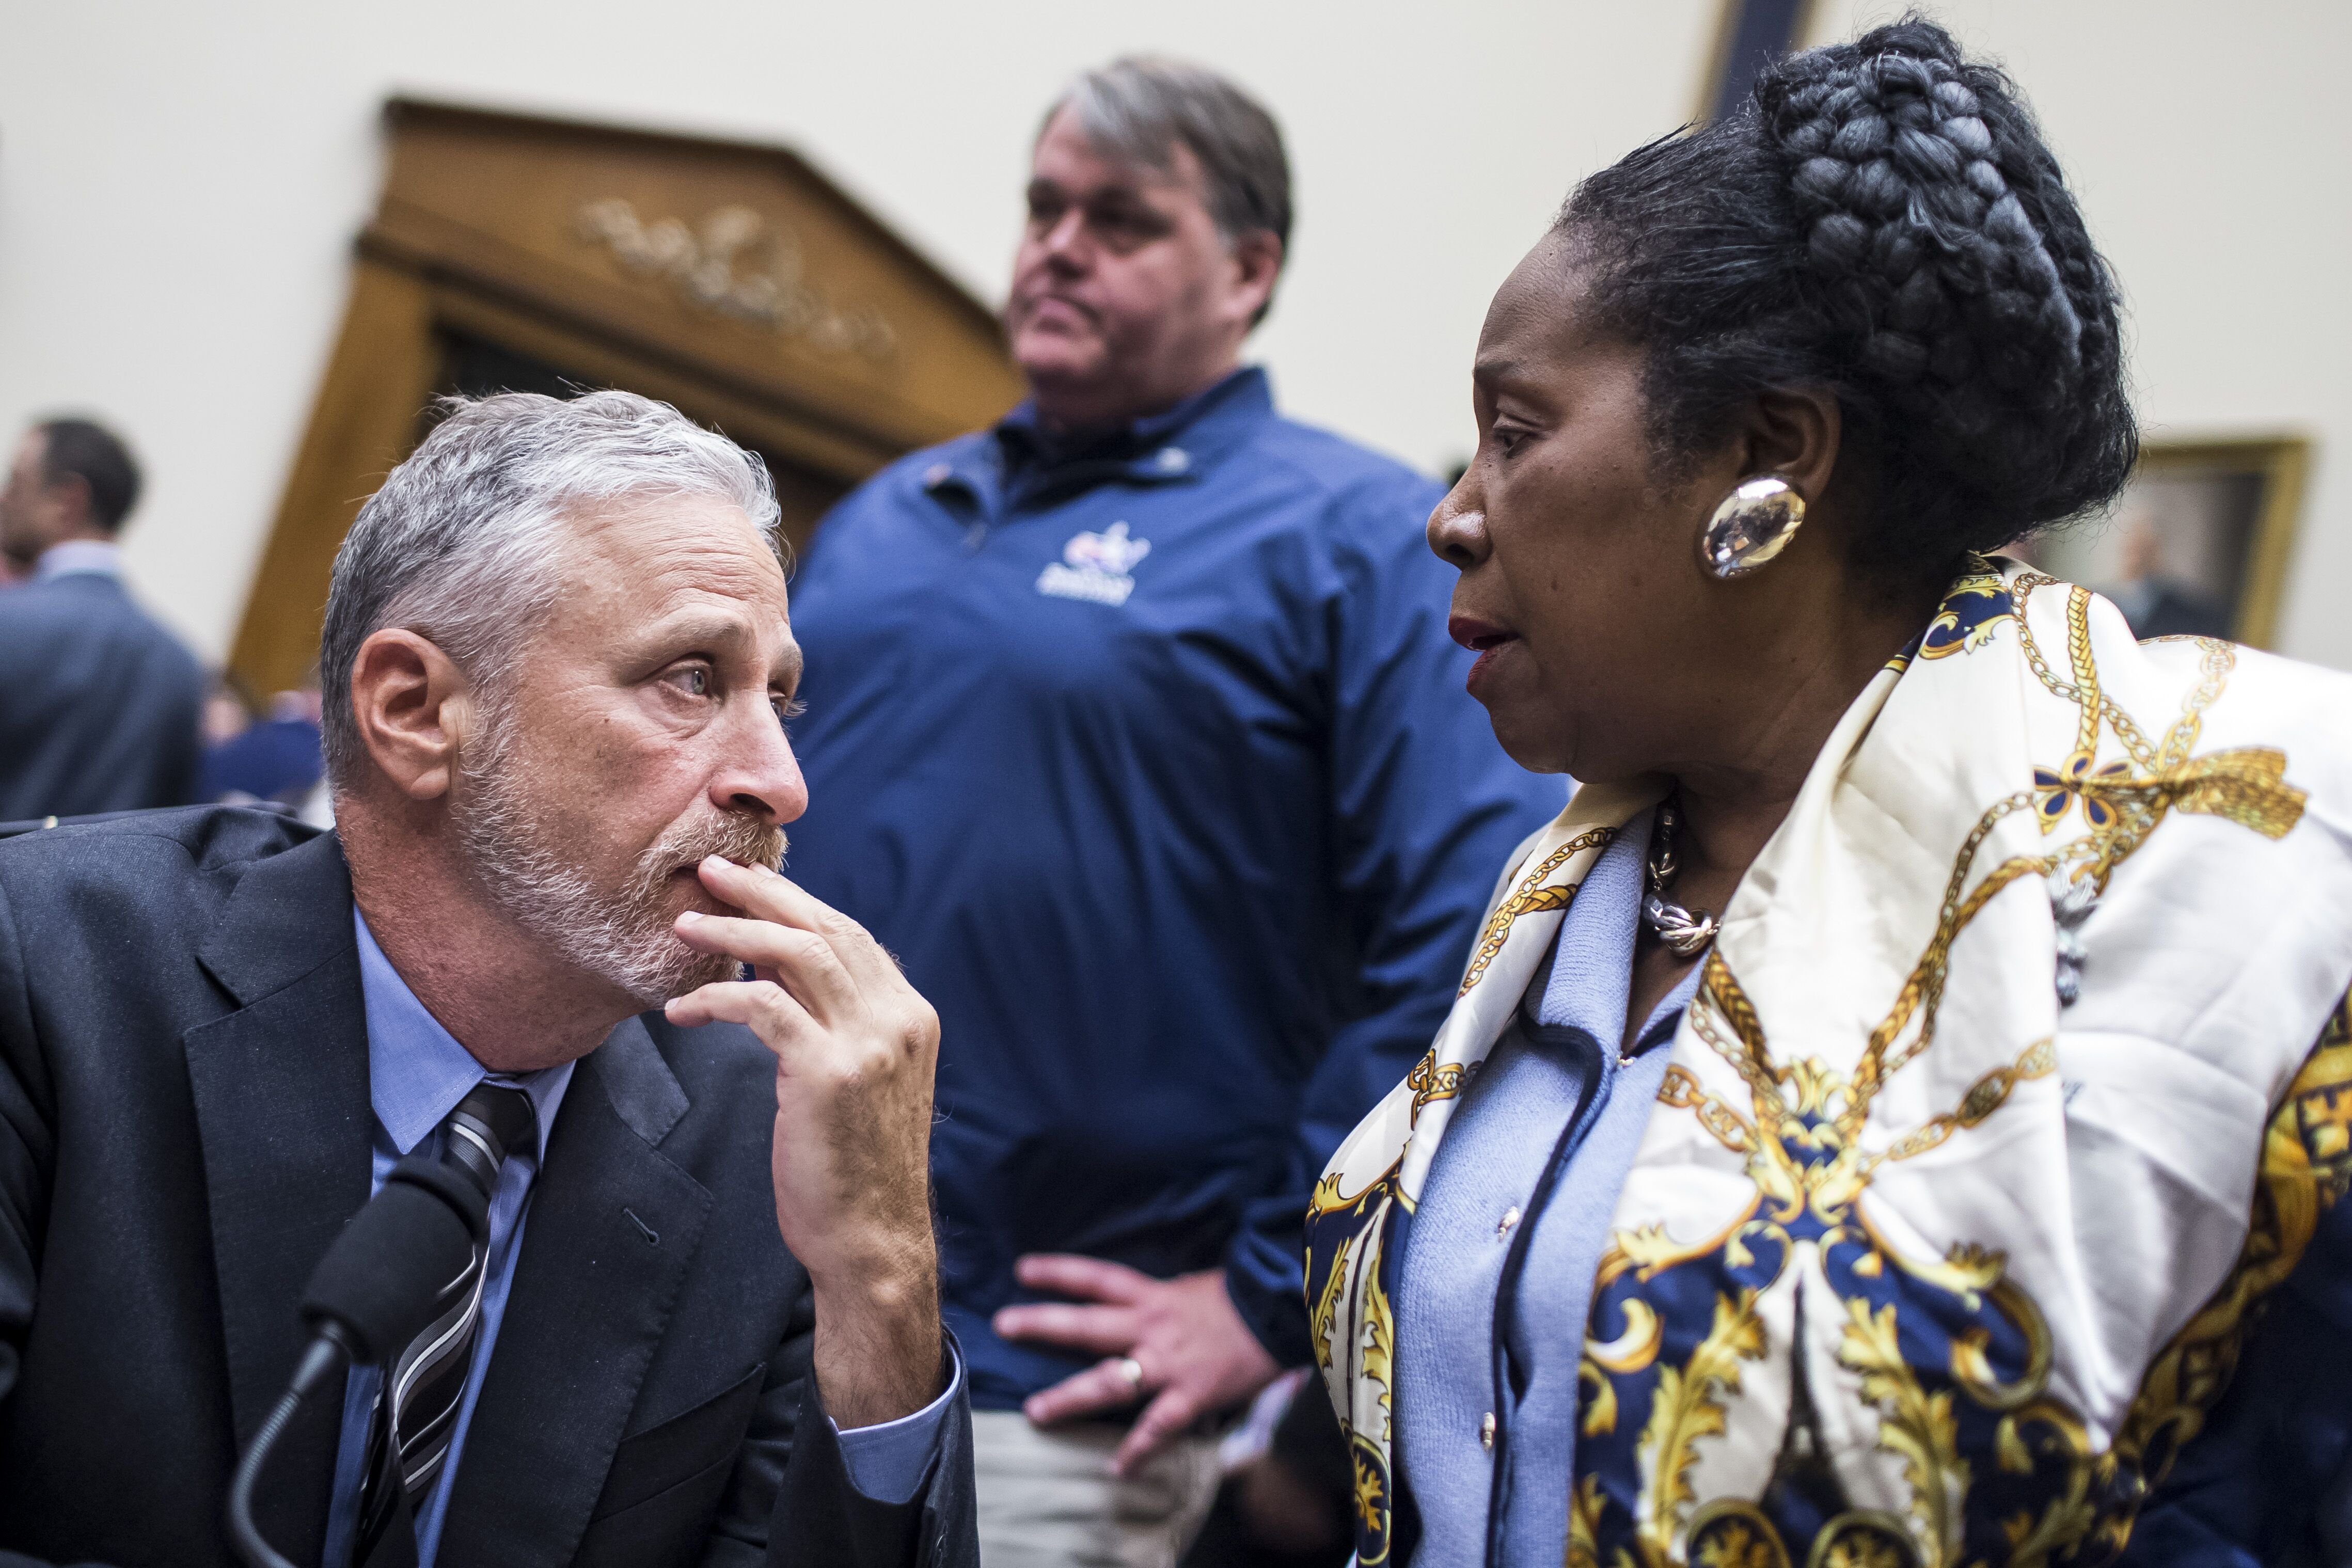 Jon Stewart speaks to Rep. Sheila Jackson Lee (D-TX) on Capitol Hill on June 11, 2019 in Washington, DC. | Source: Getty Images